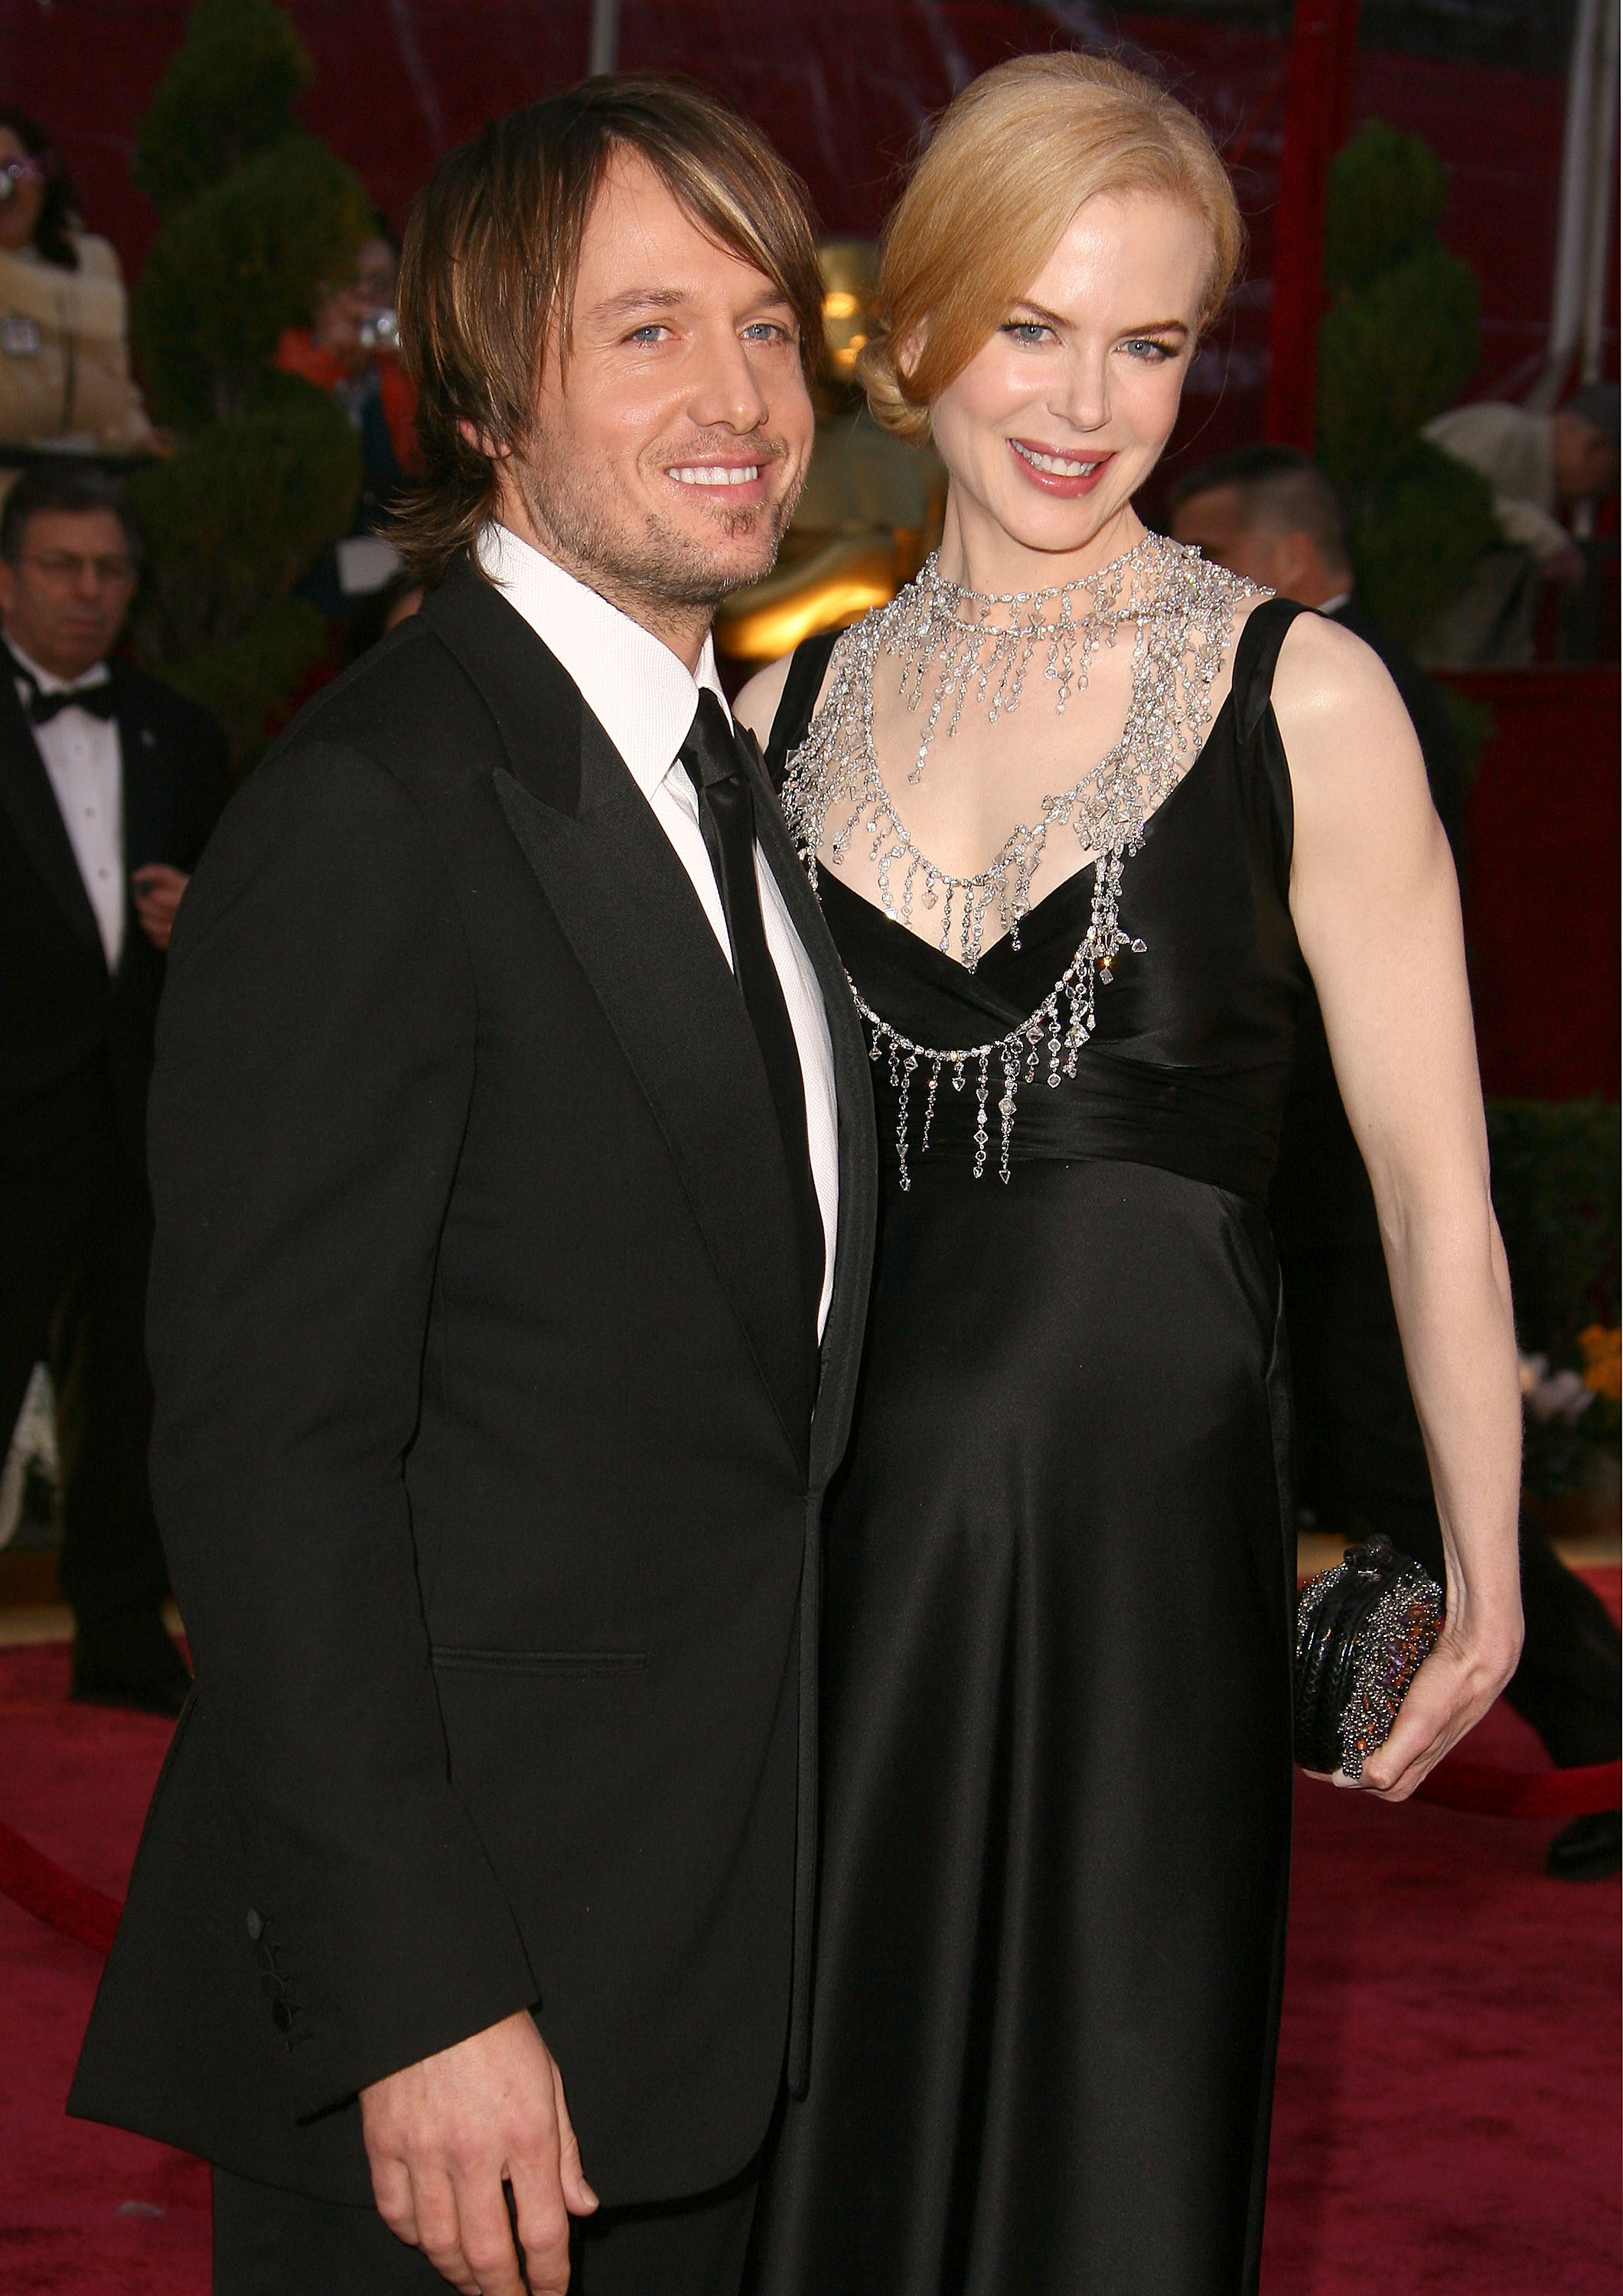 Keith Urban and Nicole Kidman attend the 80th Annual Academy Awards at the Kodak Theater on February 24, 2008, in Los Angeles, California. | Source: Getty Images